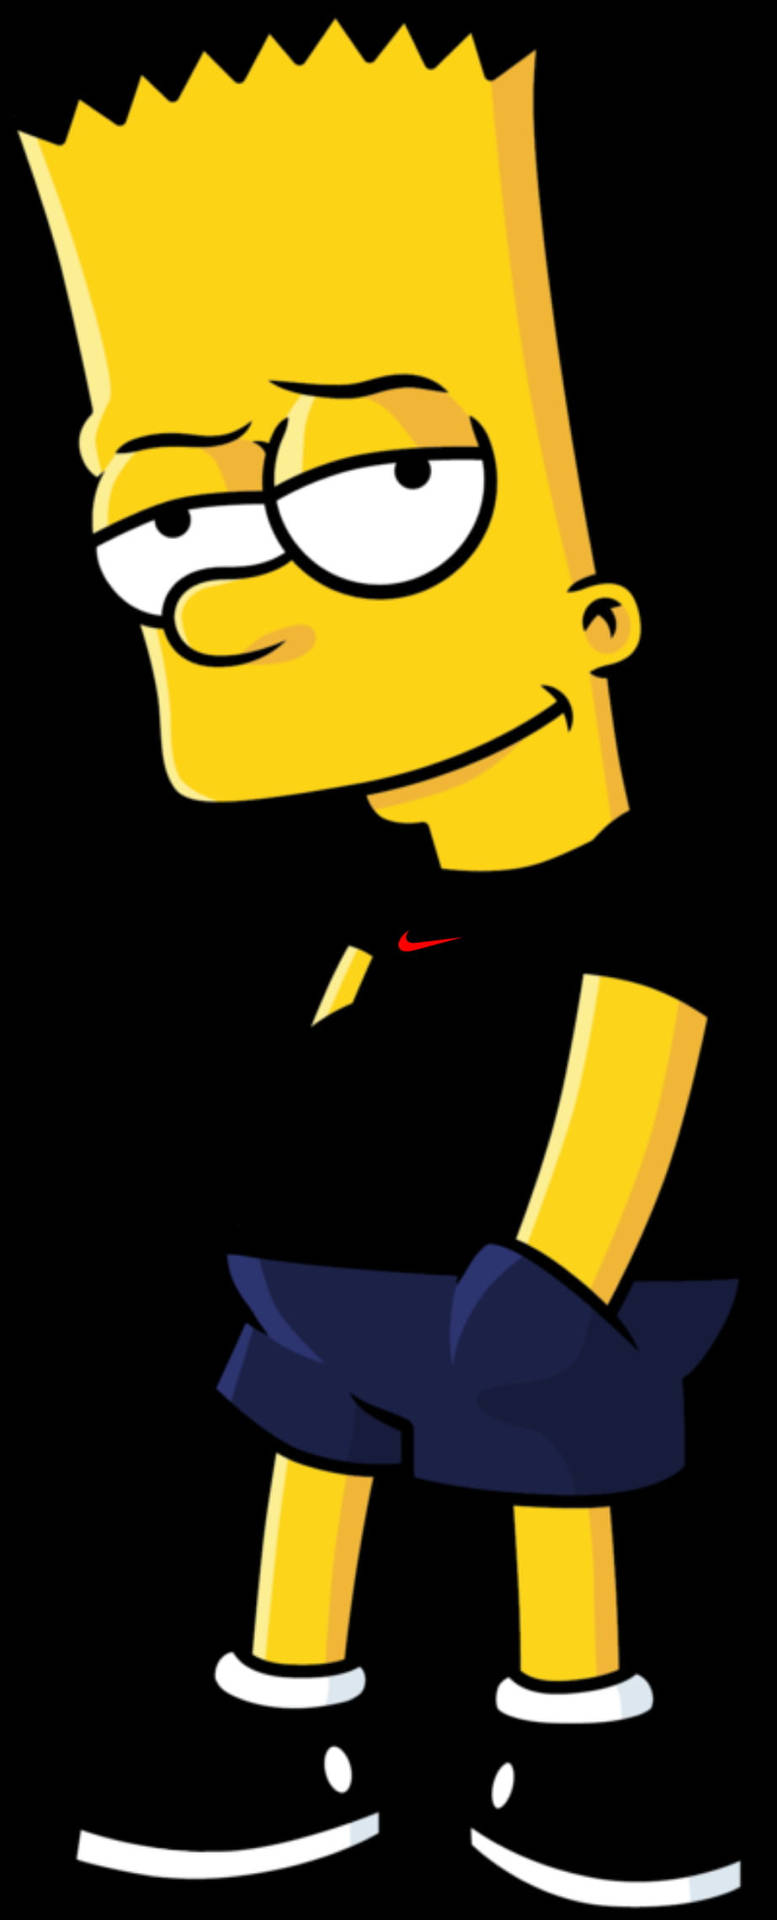 Cool Bart Simpson With Black Shirt